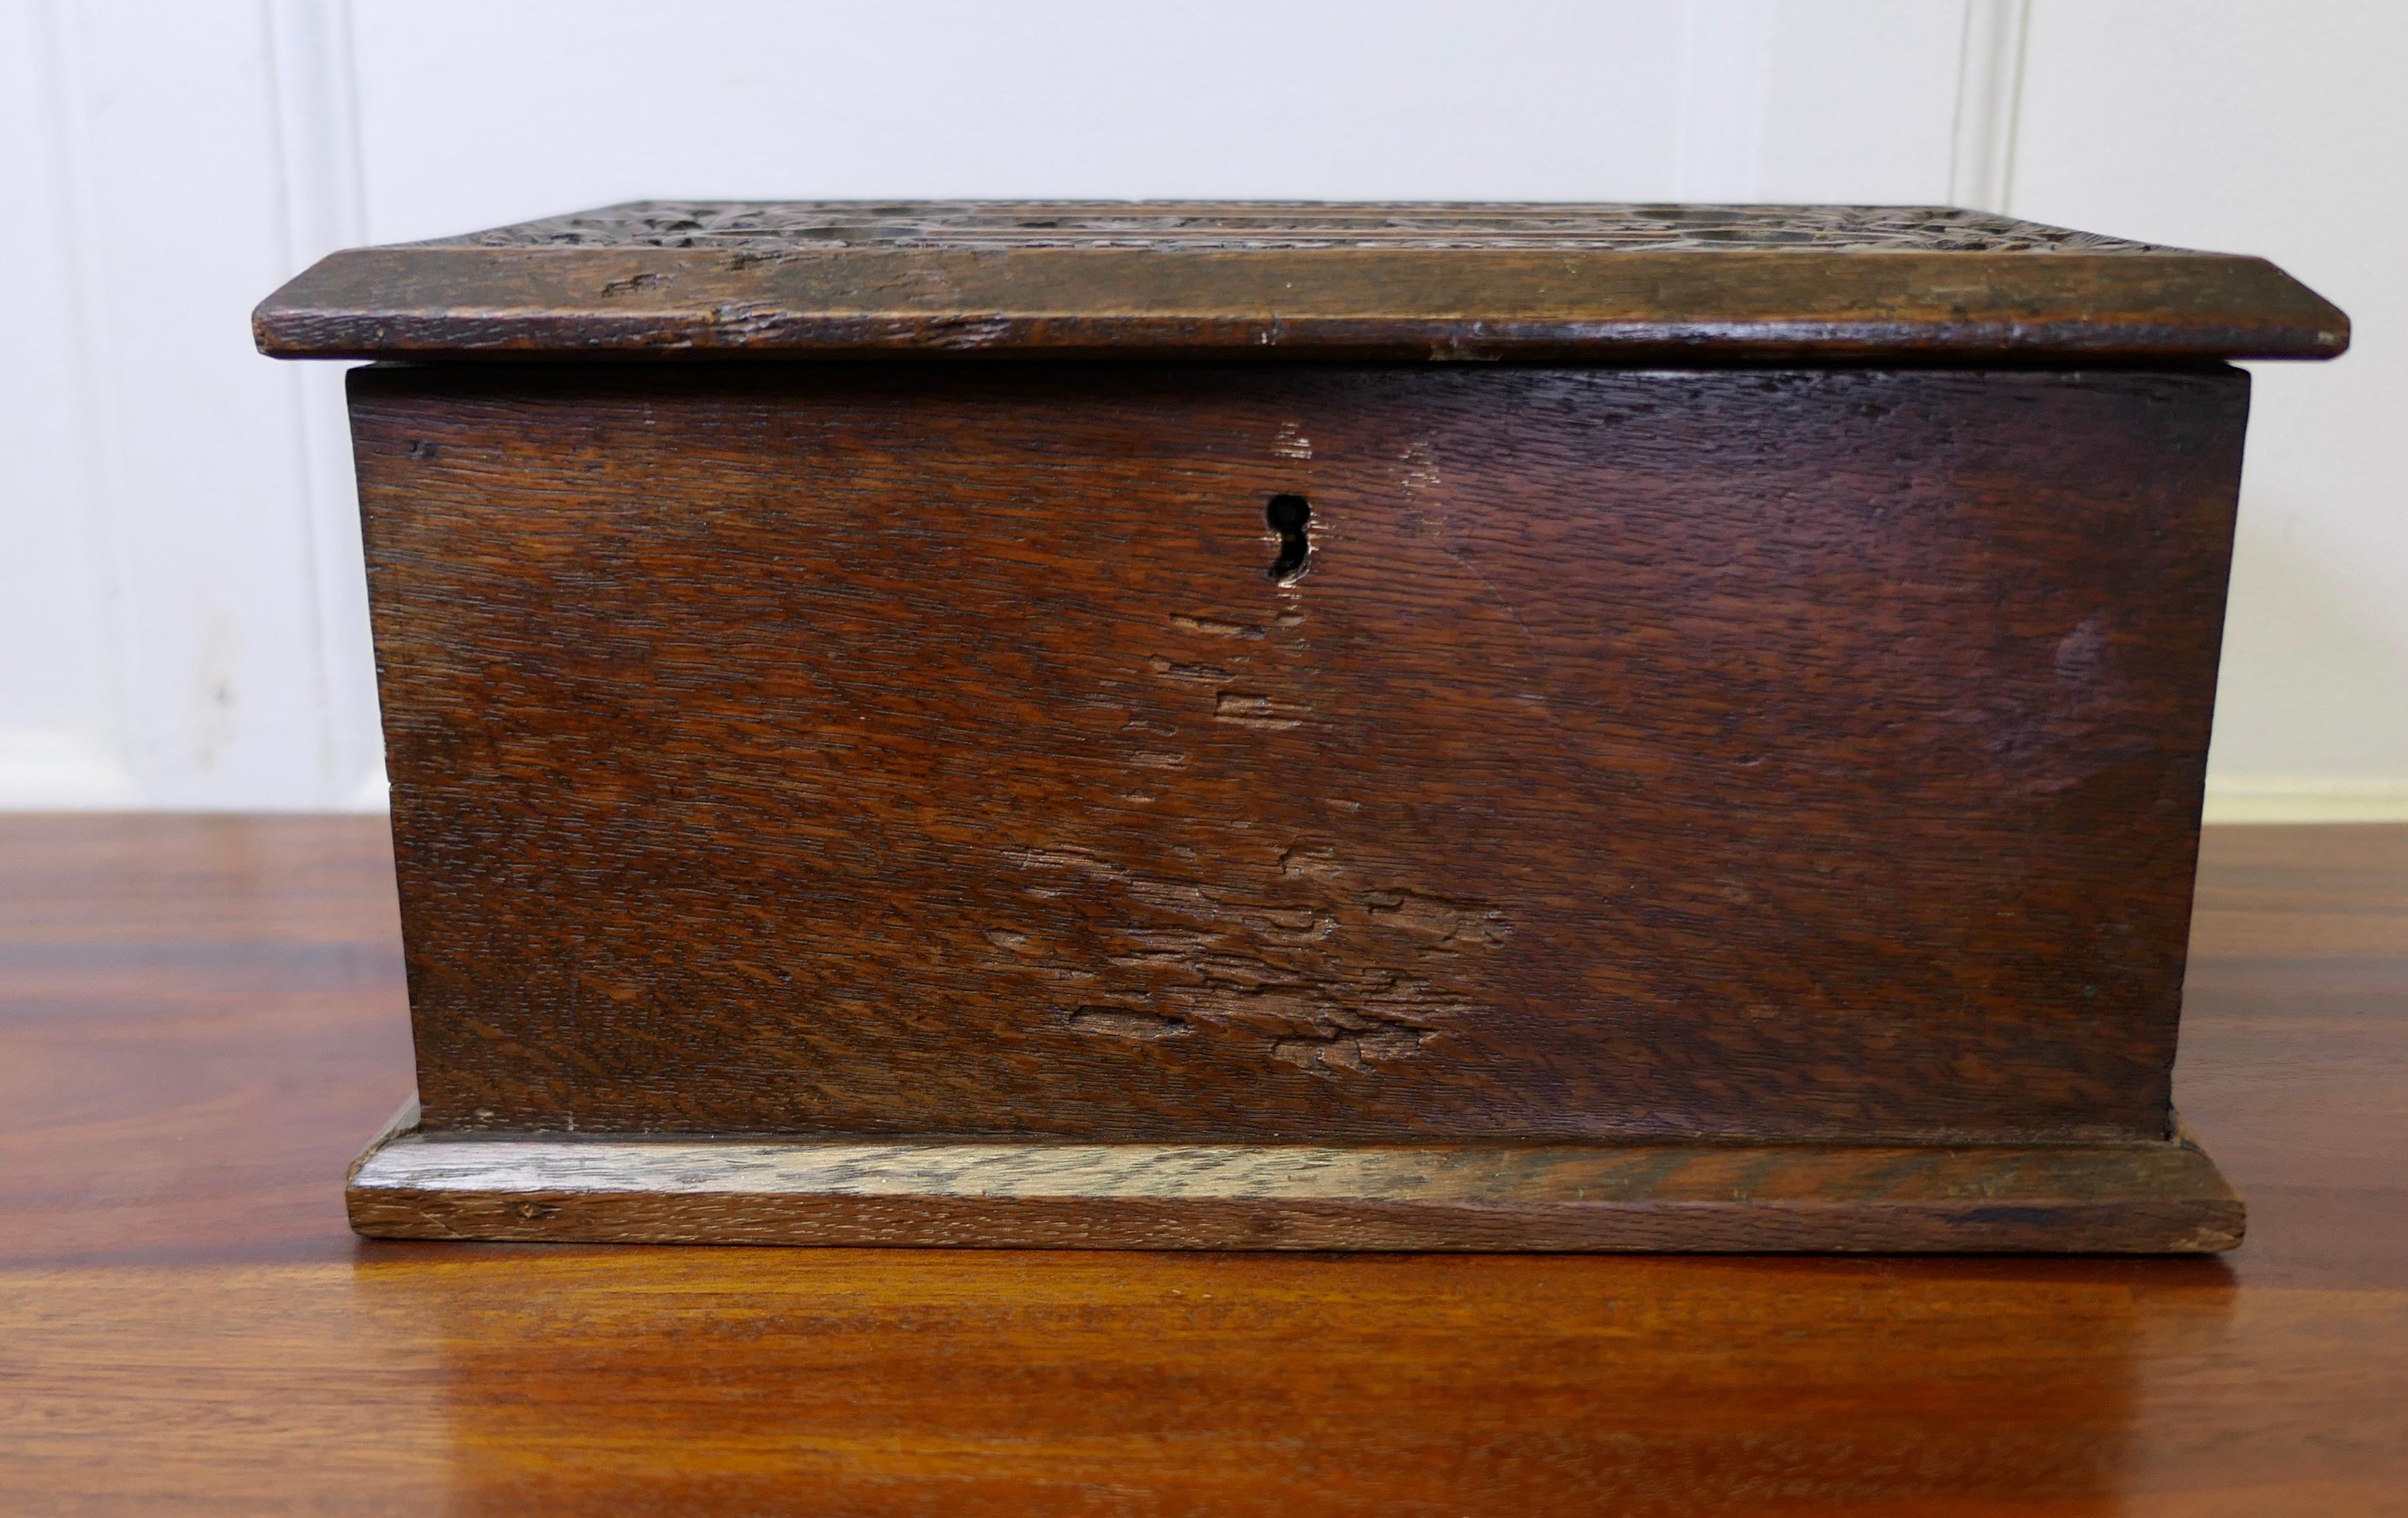 19th Century Carved Oak Correspondence, Post or Letter Box

This very attractive Carved Box is made in Oak, it is carved on the top with 2 letter slots, one for UNANSWERED and the other for ANSWERED letters
The interior has 2 dividers to keep the